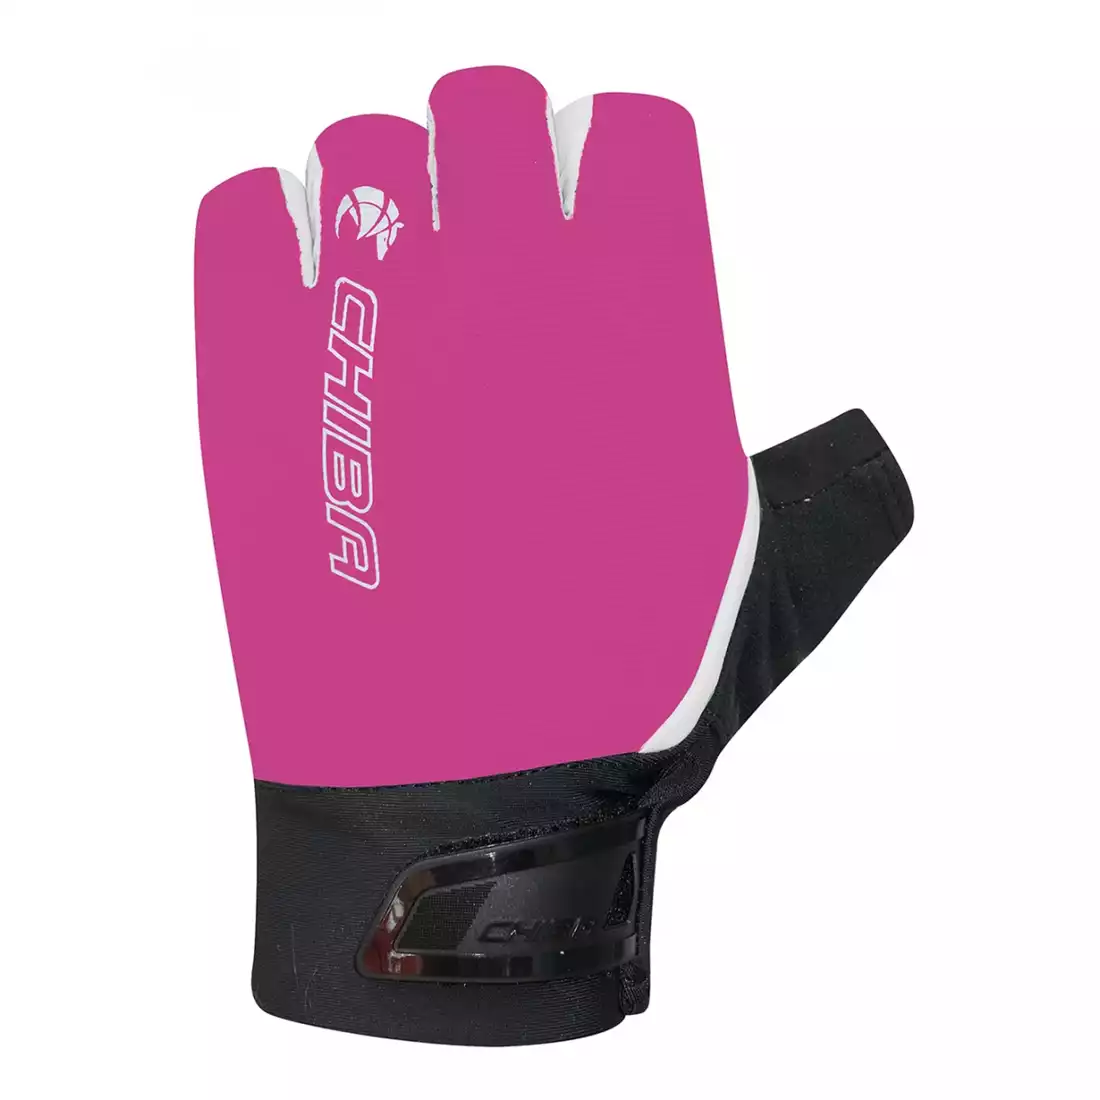 CHIBA LADY SUPERLIGHT Women's cycling gloves, pink